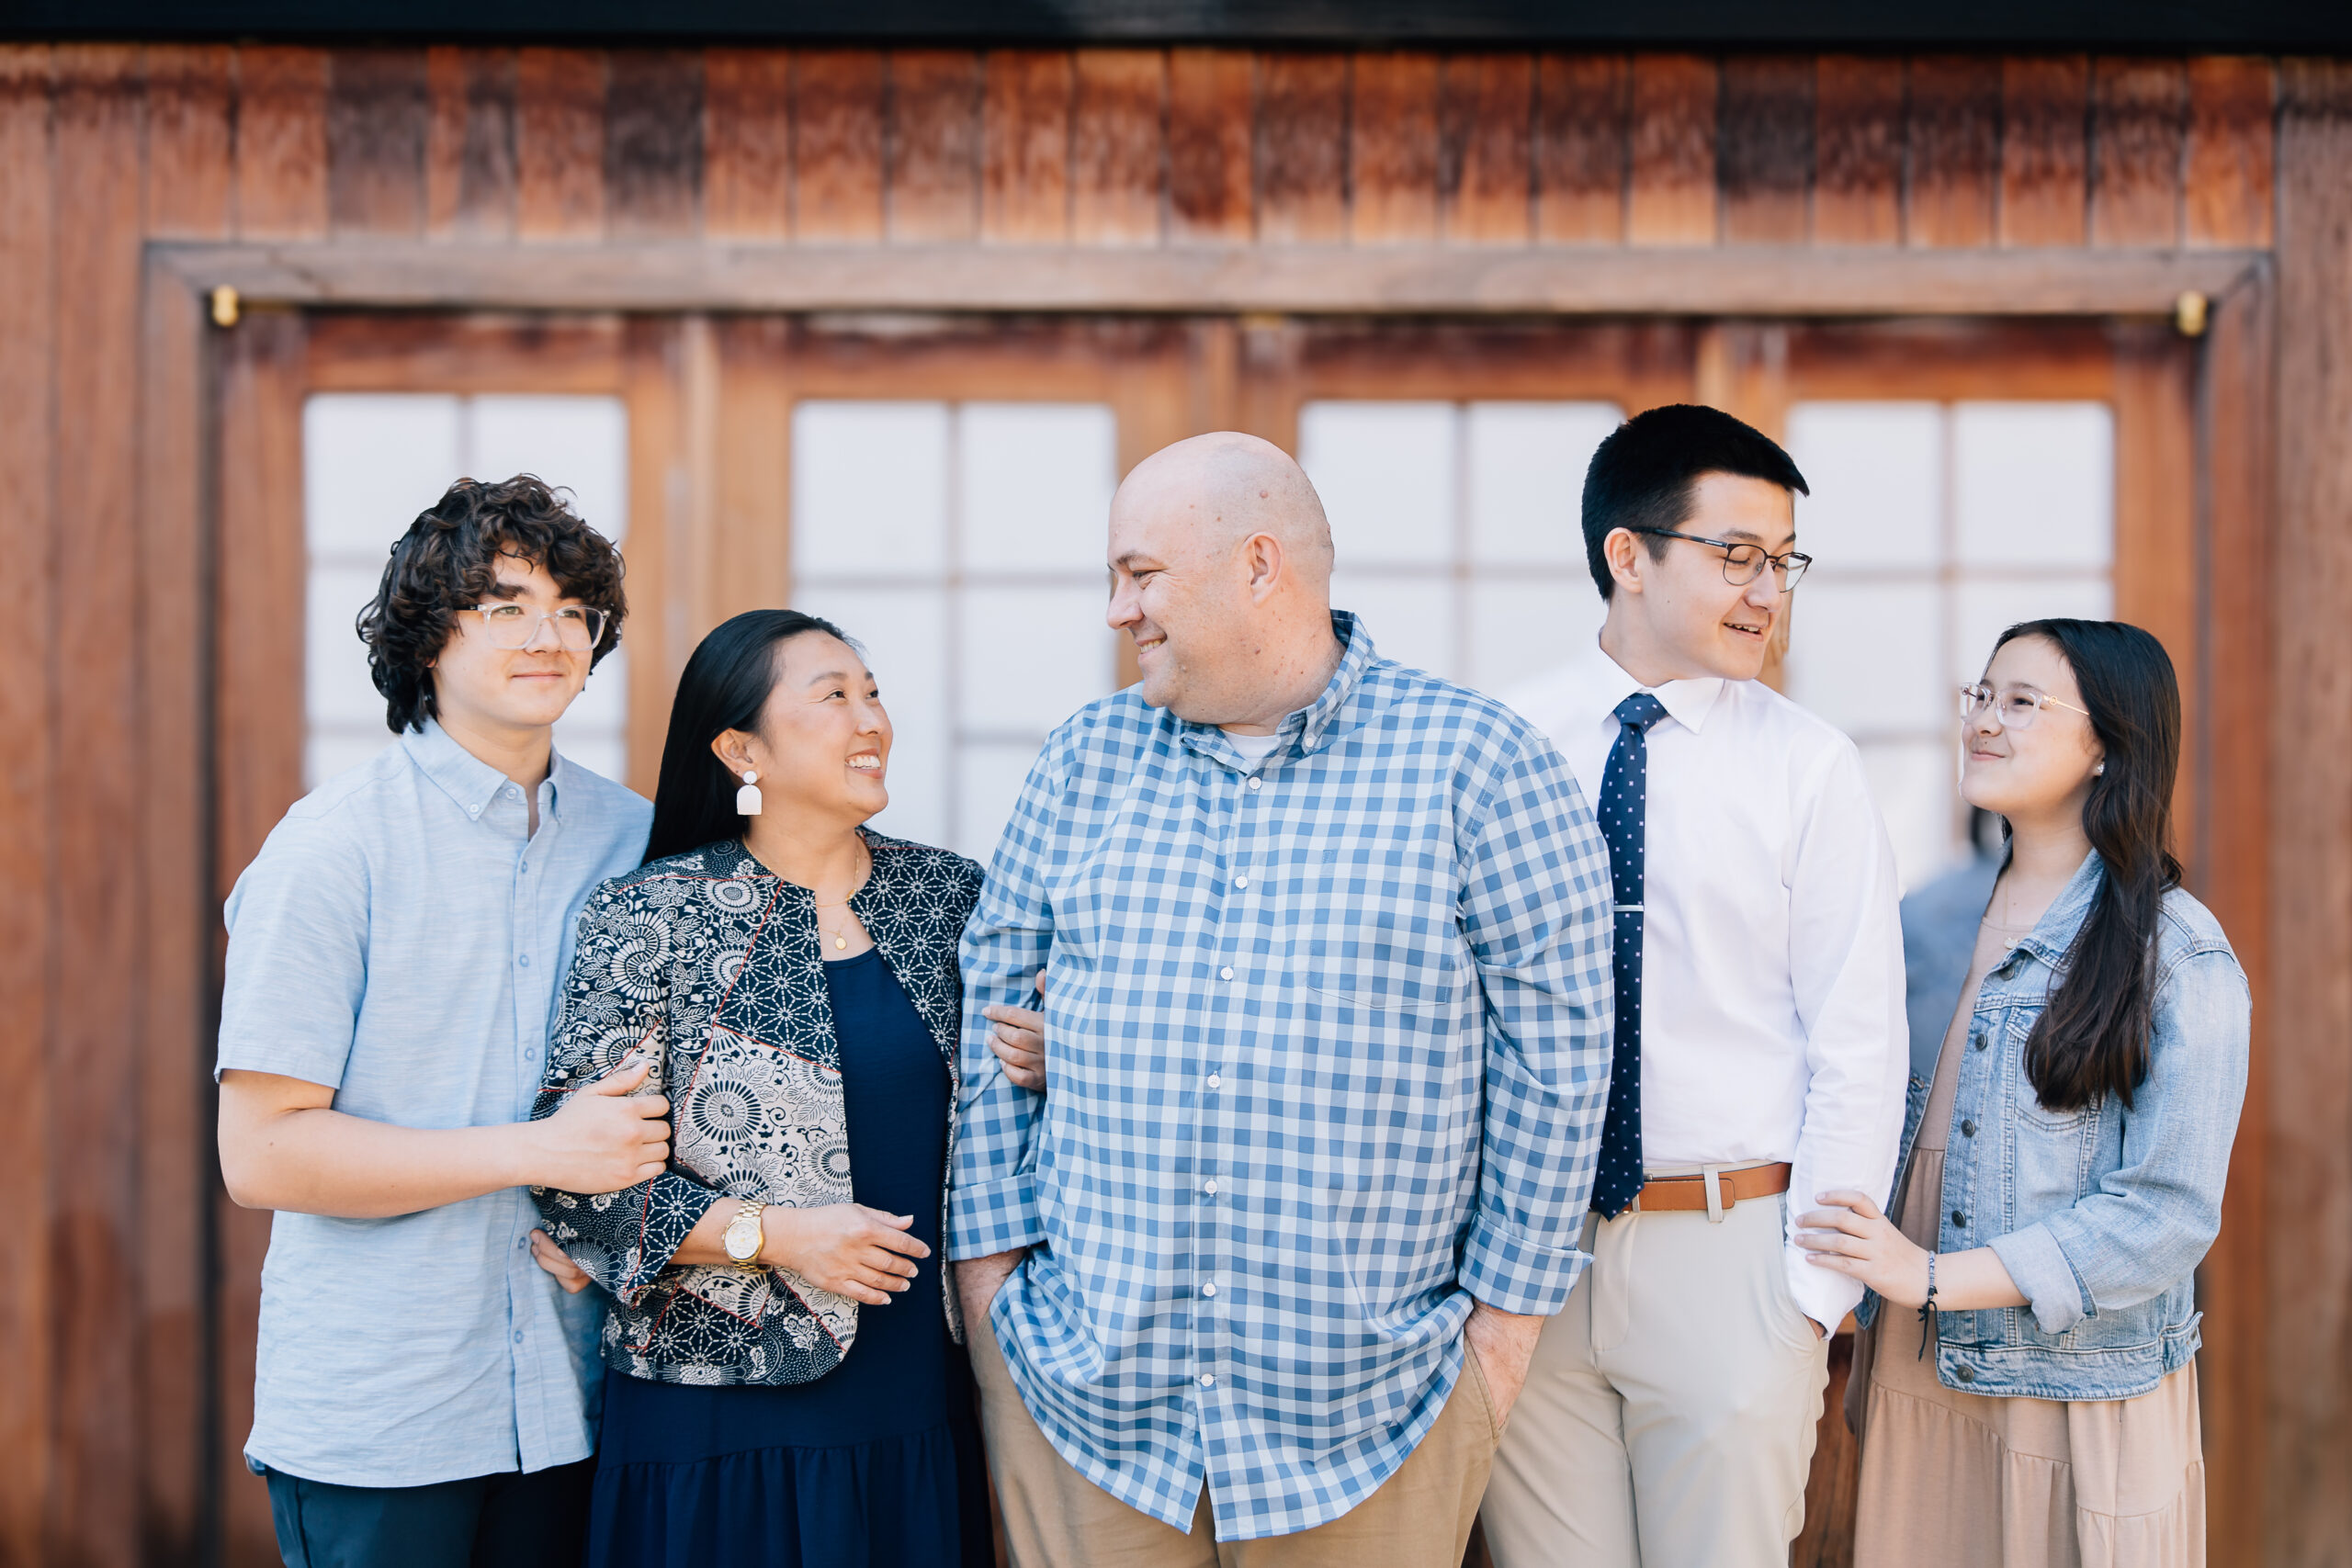 Tennessee family photographer Kailee Masumura shares tips to help you get the most out of your family photo session. Tips tricks professional family portraits advice #familyphototips #familyphotophotographer #tennesseefamilyphotographer #kailee matsumura photography #familyportraits
